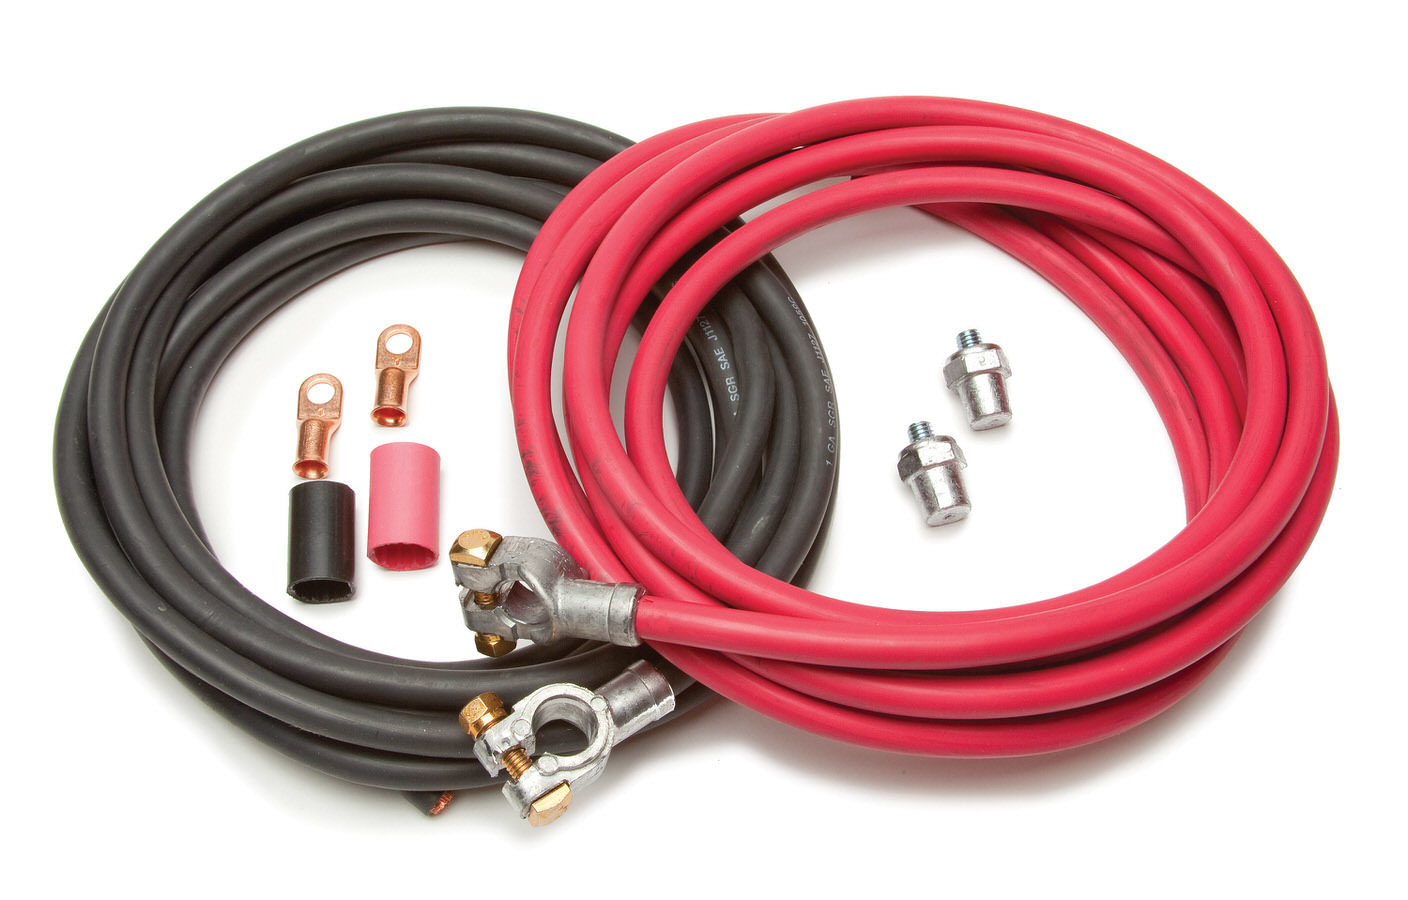 Painless Wiring 40105 Battery Cable Kit, 1 Gauge, Top Mount Battery Terminals, Side Post Adapters / Terminals / Heat Shrink Included, Copper, 16 ft Red / 16 ft Black, Kit